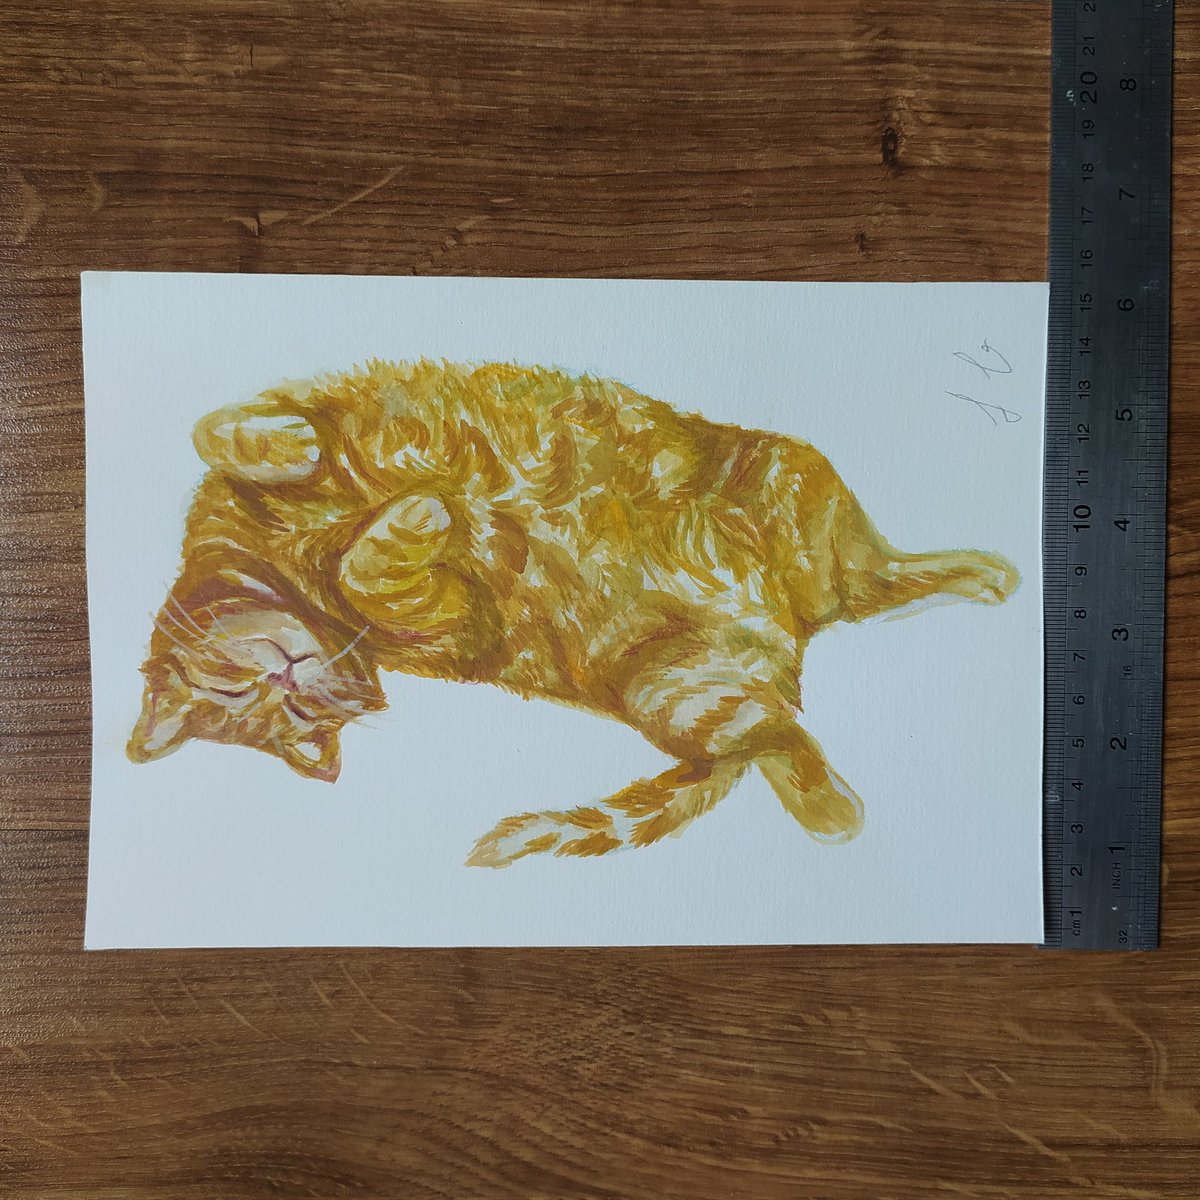 Original Watercolor Orange Cat painting on 21×15cm Thick Paper. It's not a print, it's a unique art piece.Ready for shipping.Signed by Artist. World wide Free Shipping
damdampaints.etsy.com/listing/170864…

#etsyseller 
#cottagecore 
#cottageaesthetic 
#catsofinstagram 
#catlover 
#watercolor